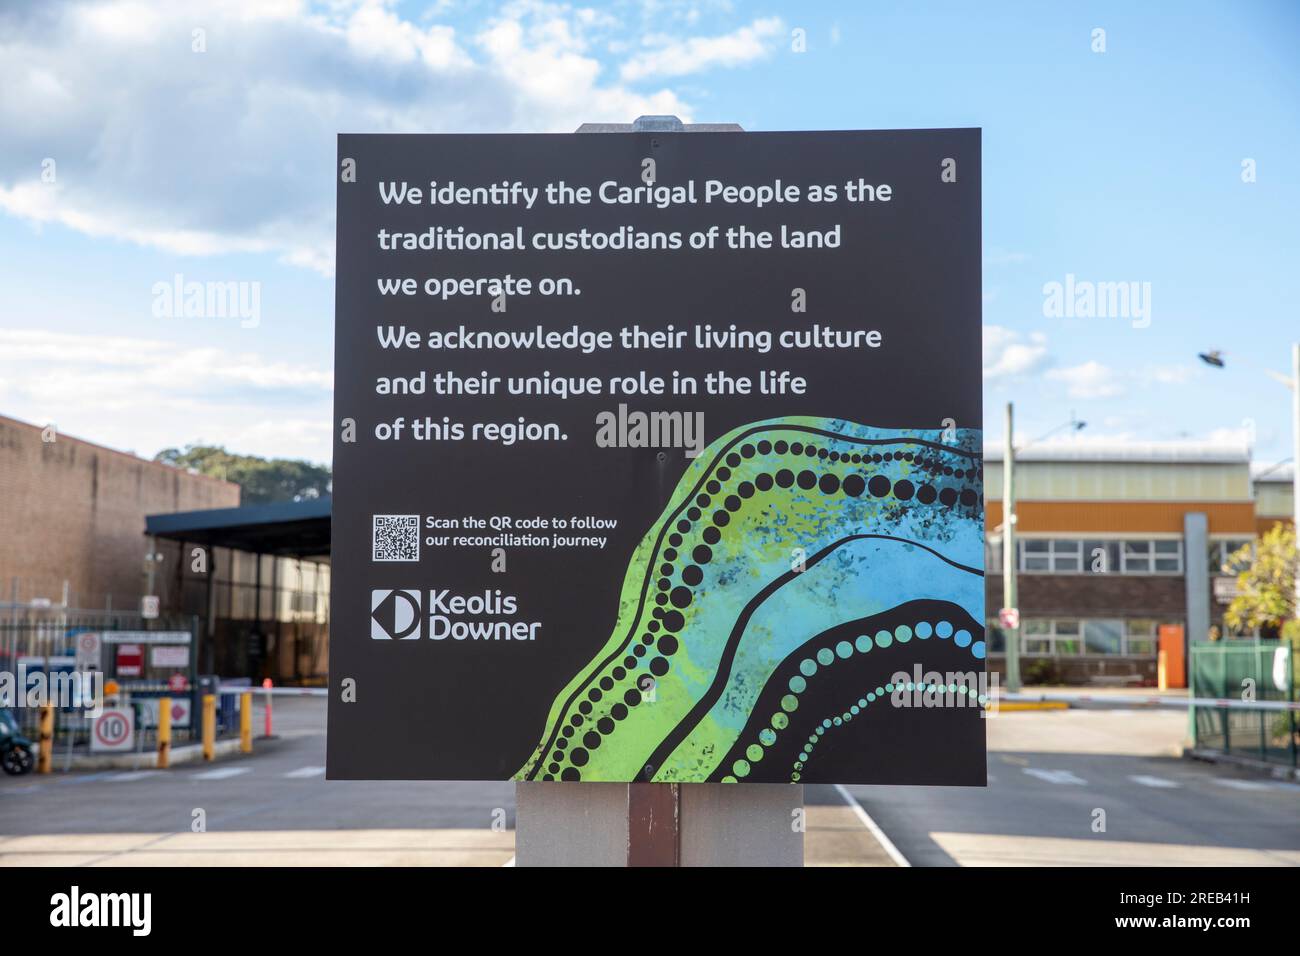 Sydney bus station with sign recognising aboriginal carigal people as traditional owners and custodians of the land,Sydney,NSW,Australia Stock Photo